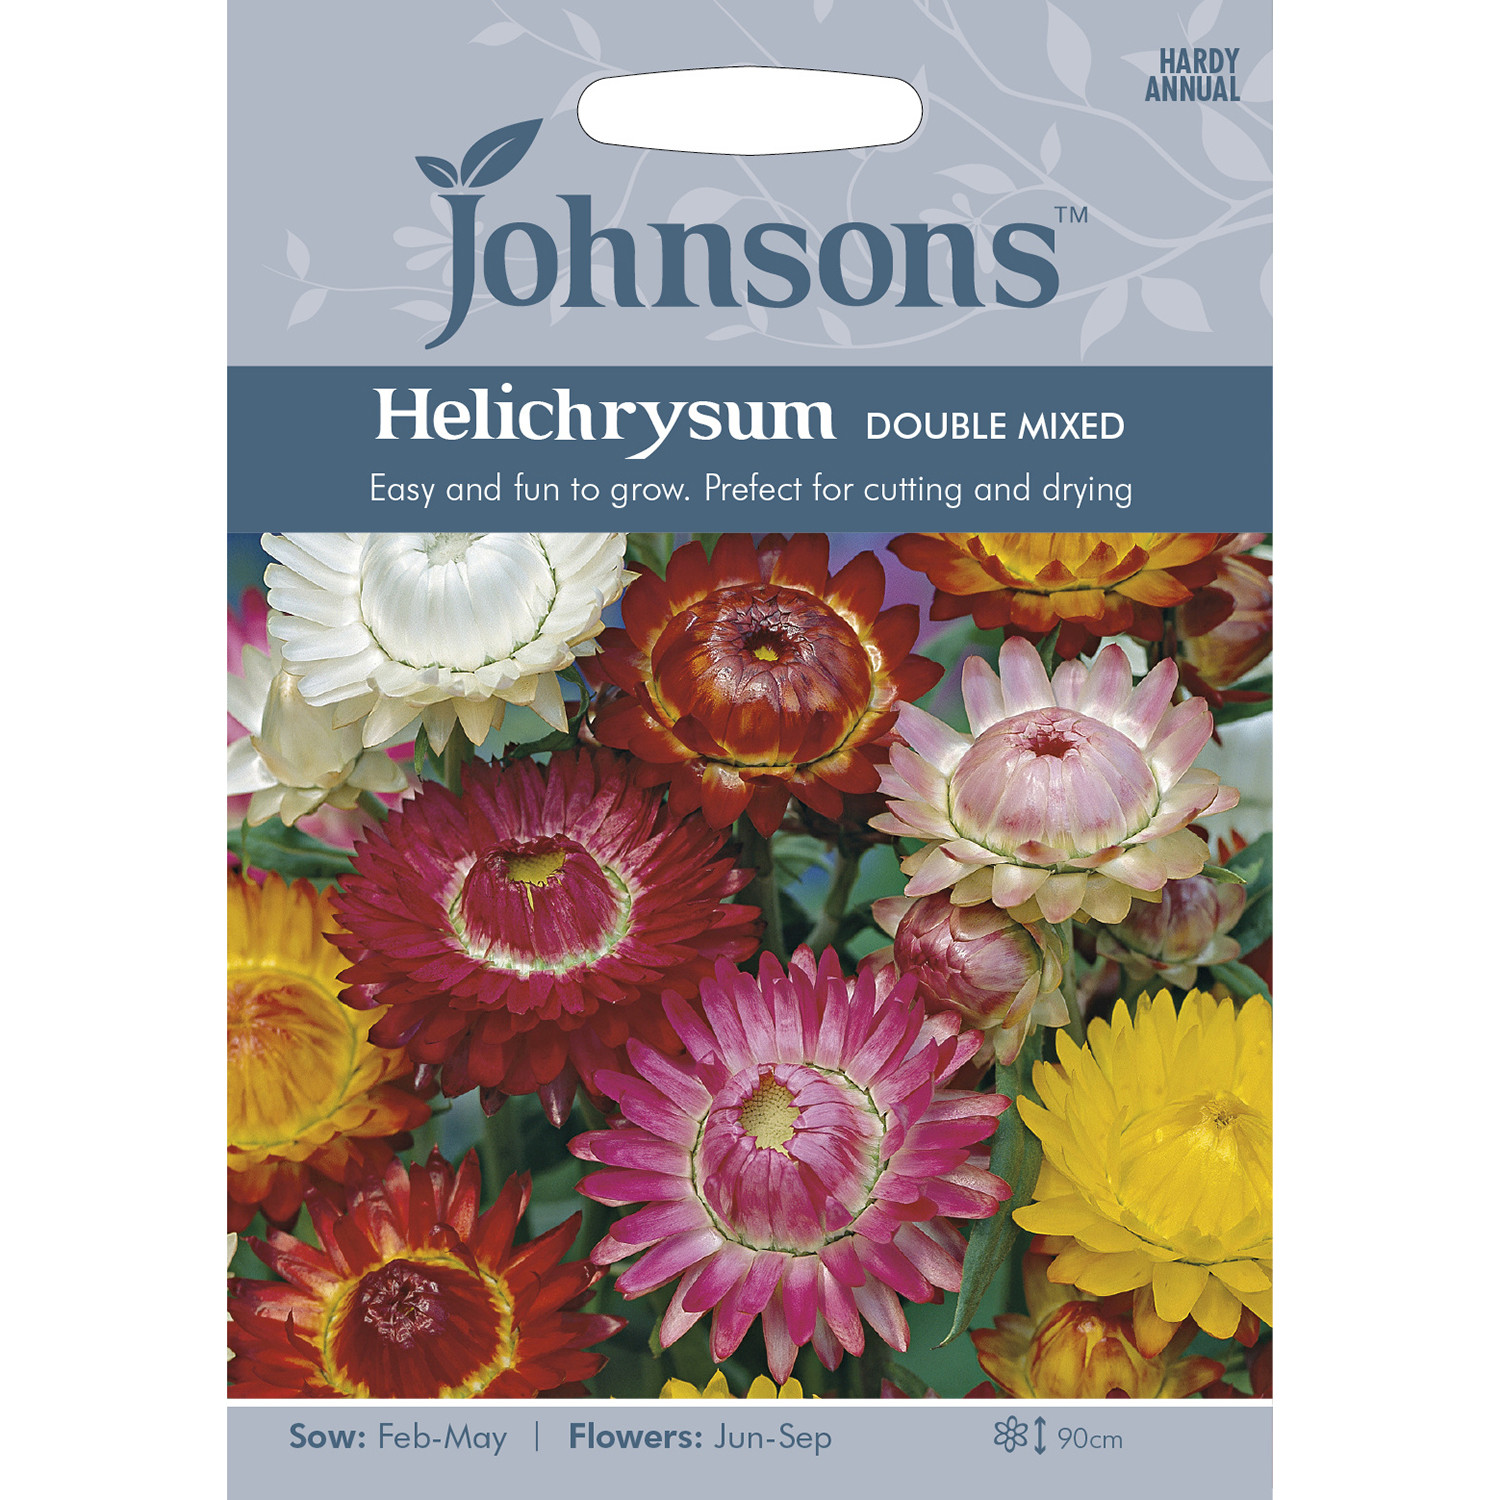 Johnsons Helichrysum Double Mixed Flower Seeds Image 2